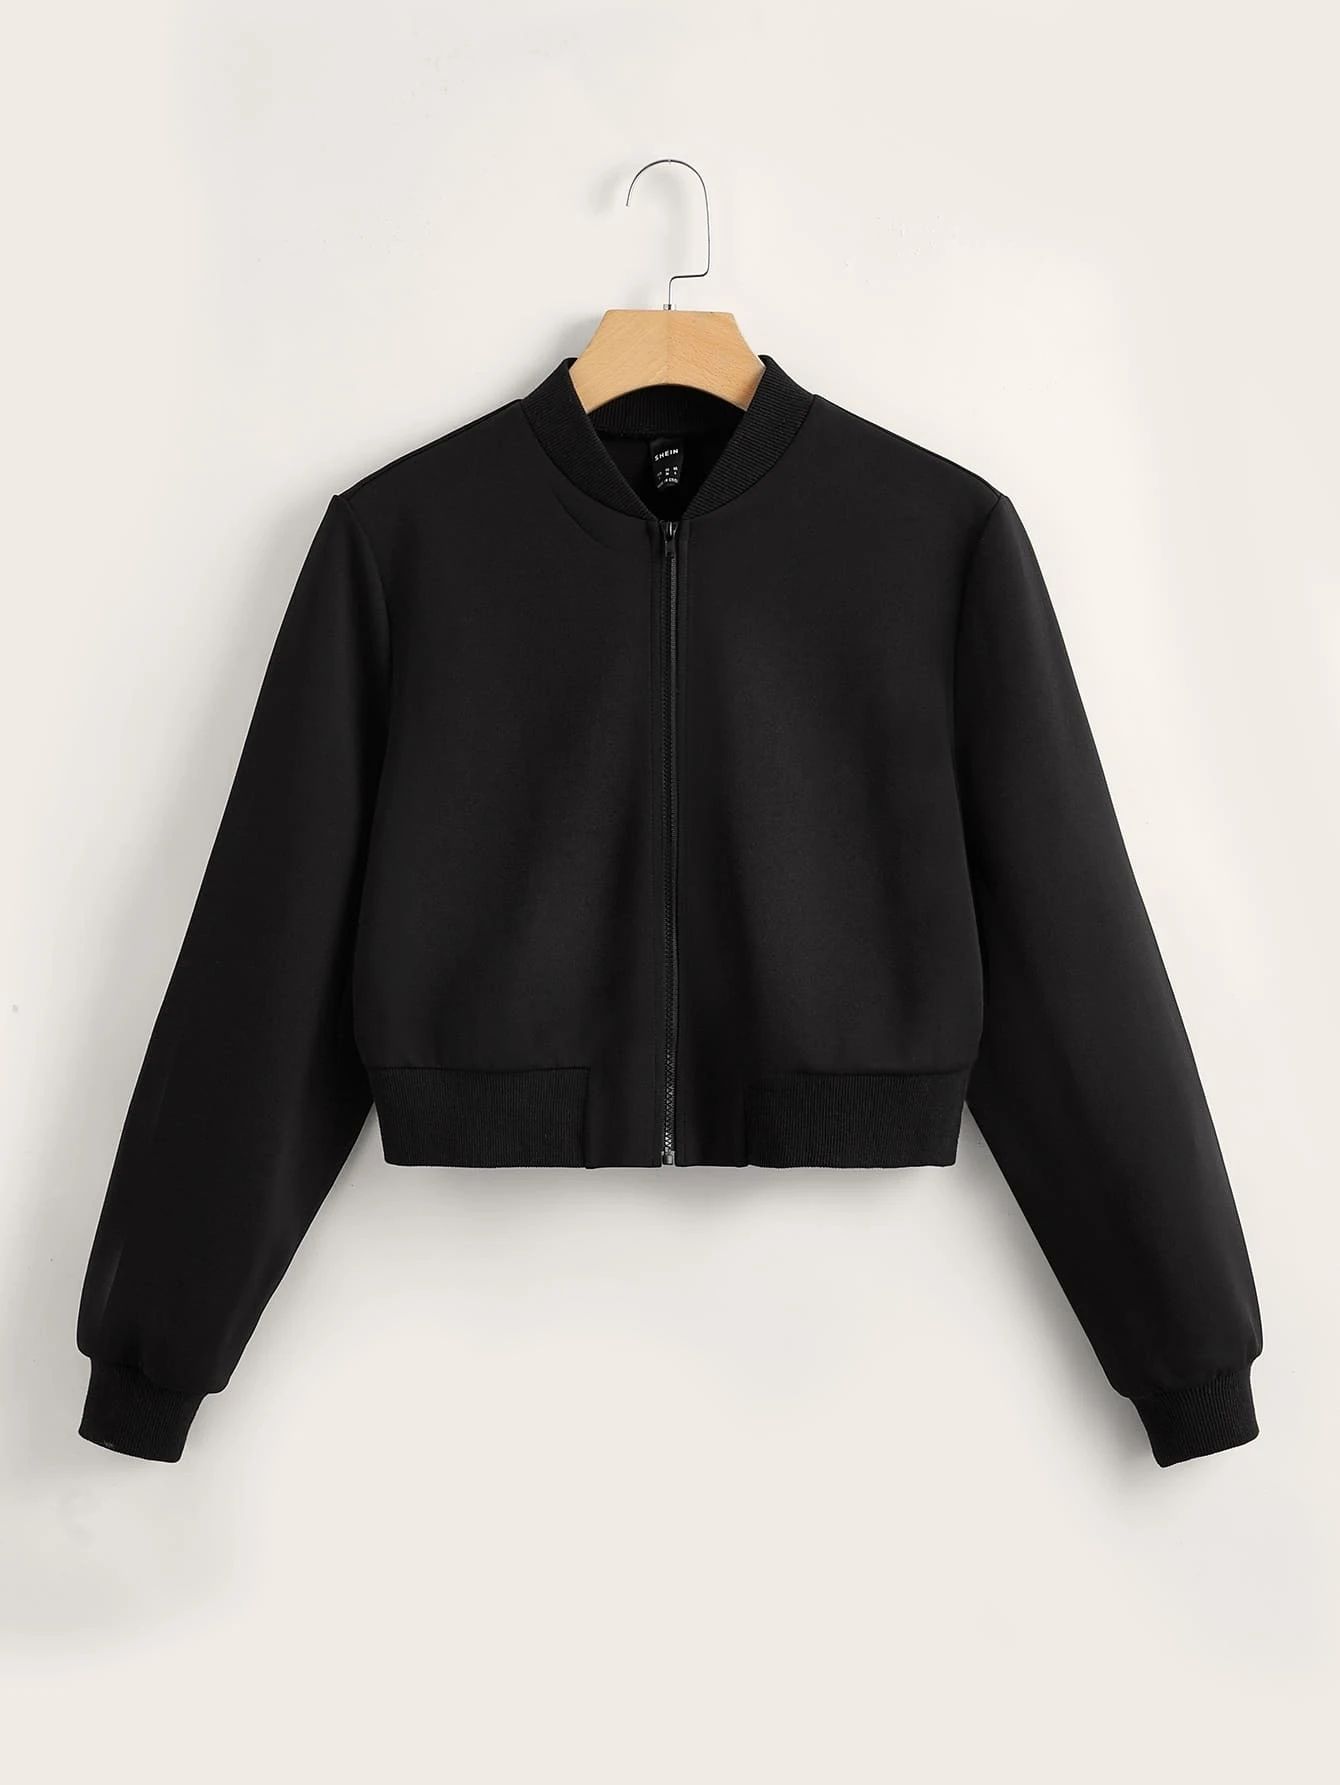 EMERY ROSE Solid Zip Up Bomber Jacket | SHEIN